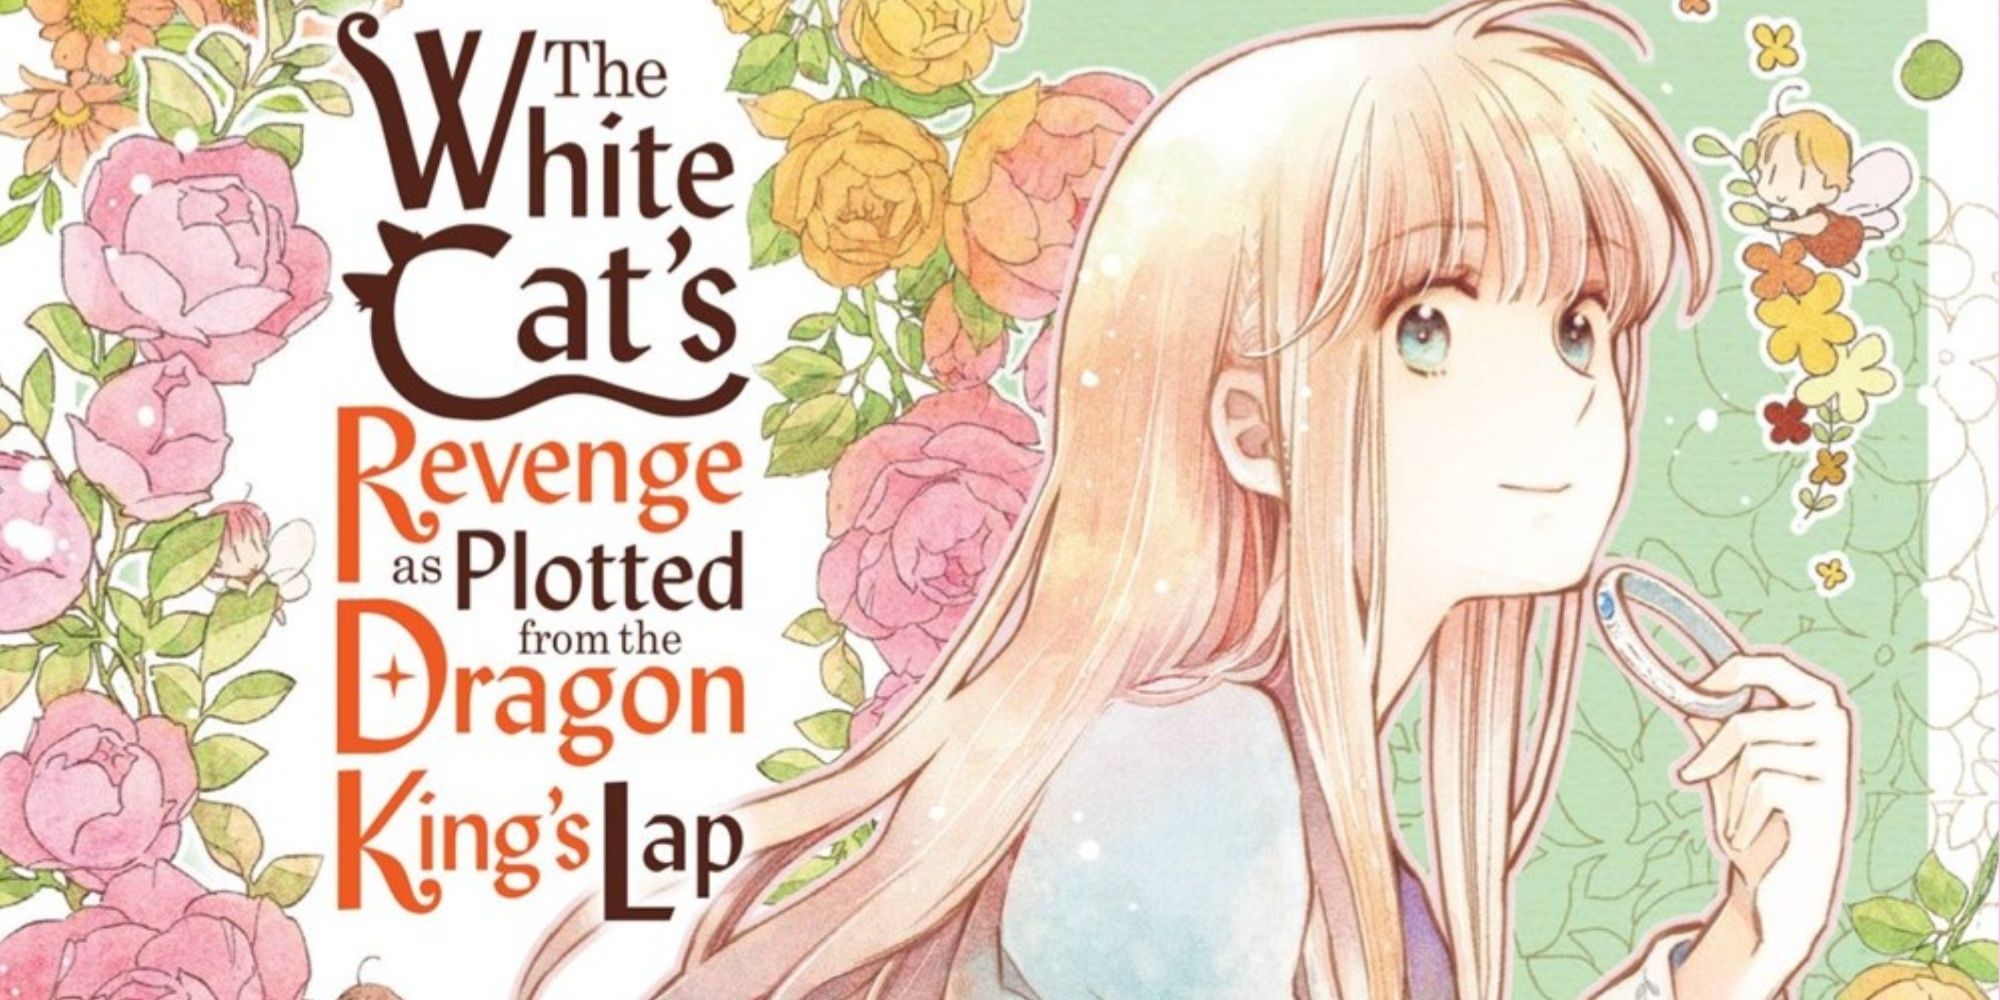 The White Cat's Revenge as Plotted from the Dragon King's Lap